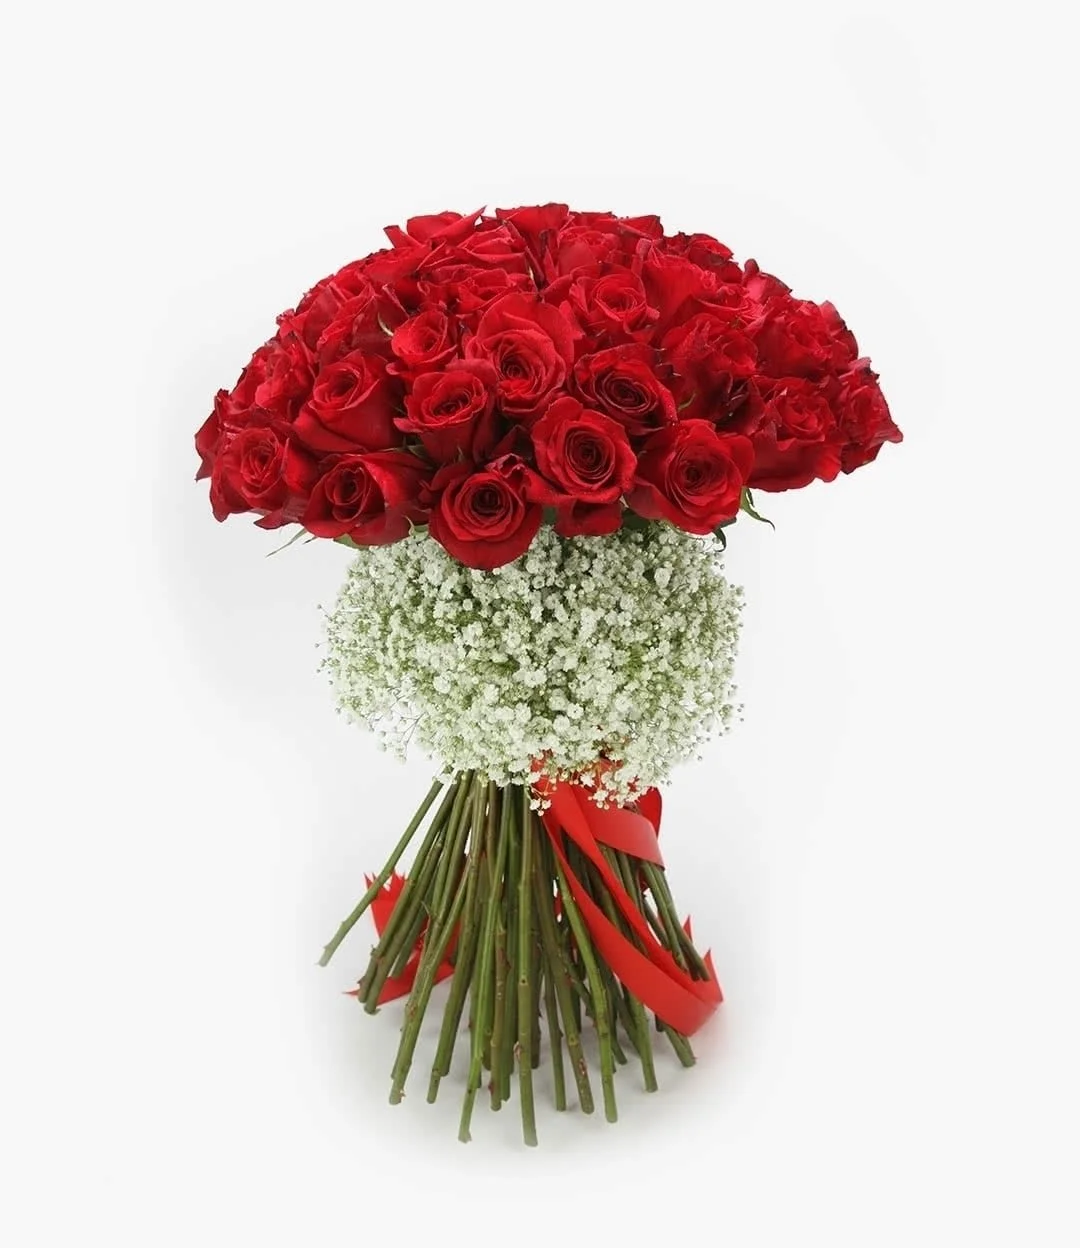 50 Red Roses Bouquet With Gypsophila